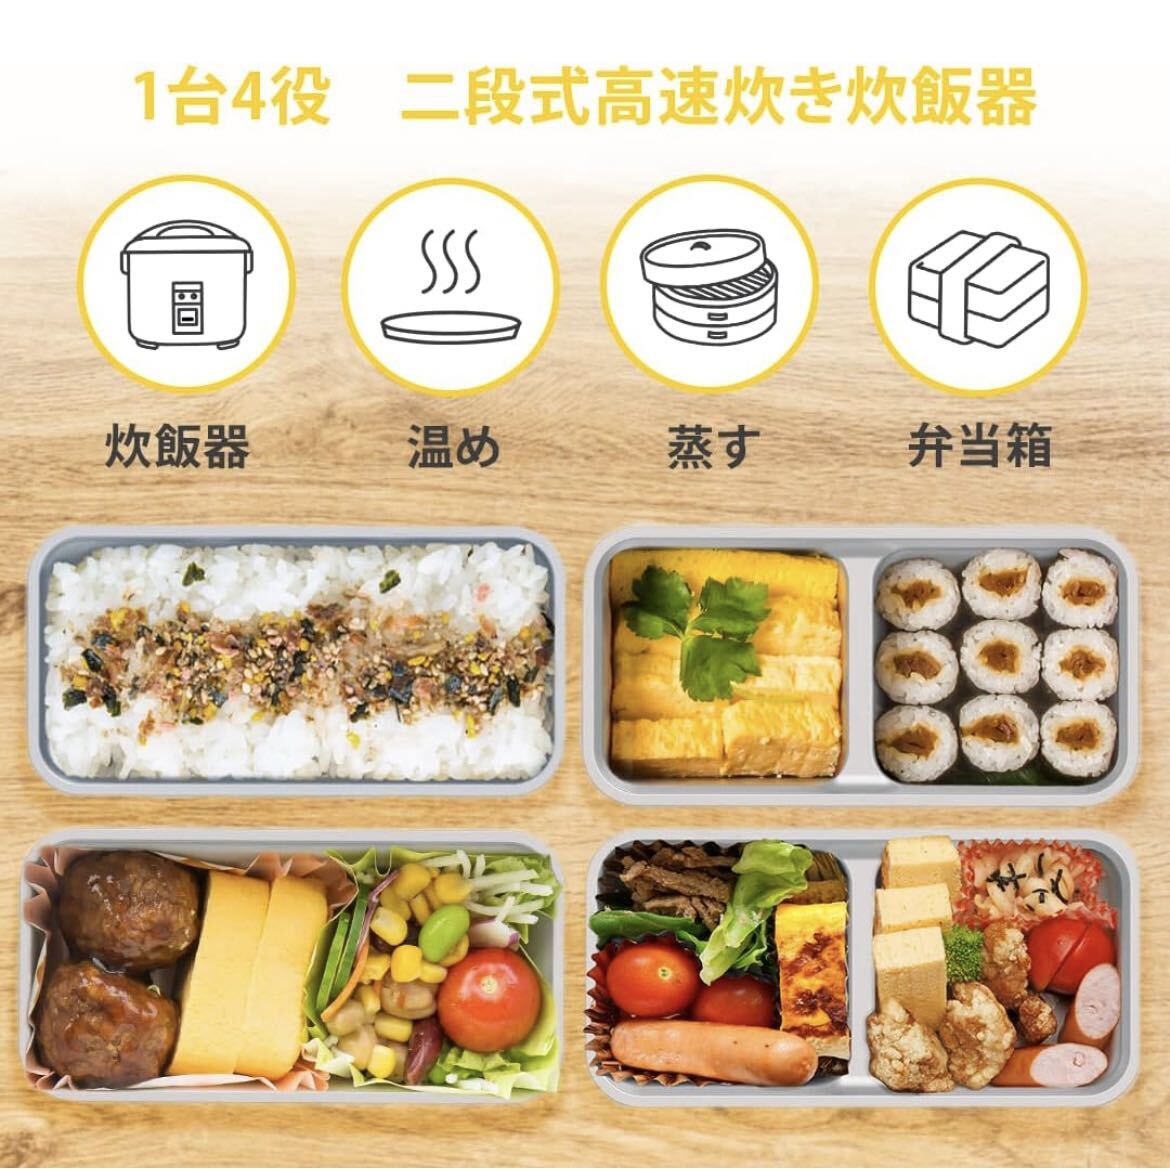 [ breaking the seal only ]Cosi home lunch box rice cooker most short 20 minute high speed .. rice cooker one person living . rice side dish . cooking rice cooker empty .. prevention with function 2 -step type 